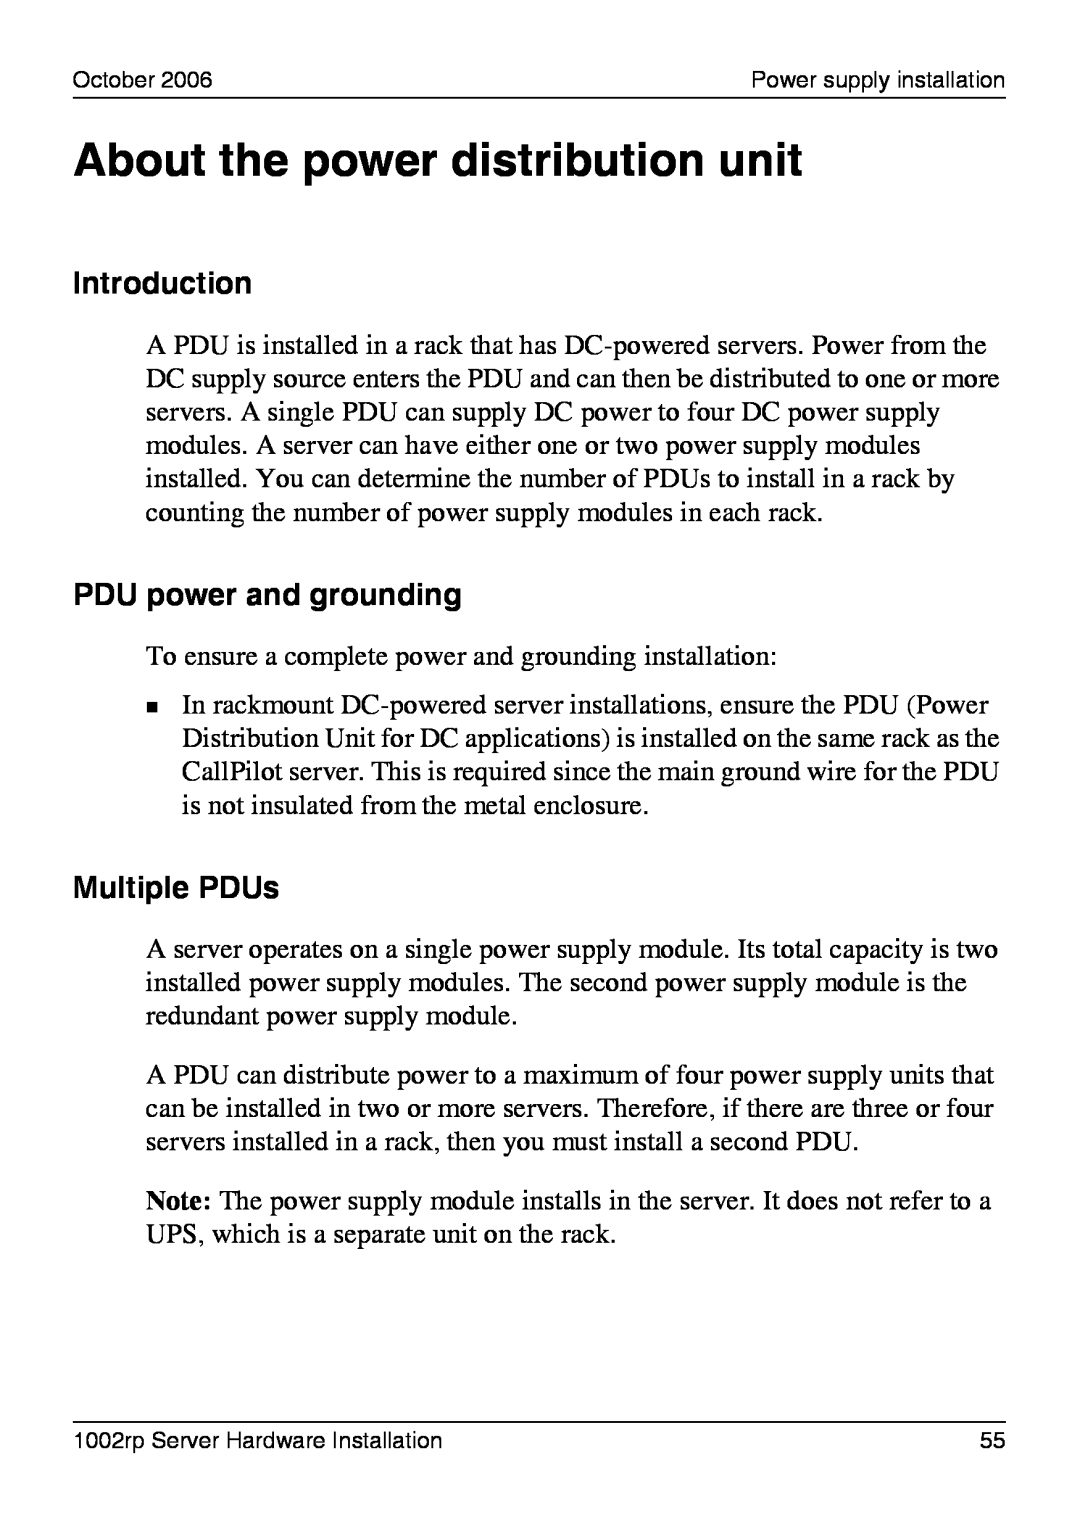 Nortel Networks 1002rp manual About the power distribution unit, PDU power and grounding, Multiple PDUs, Introduction 